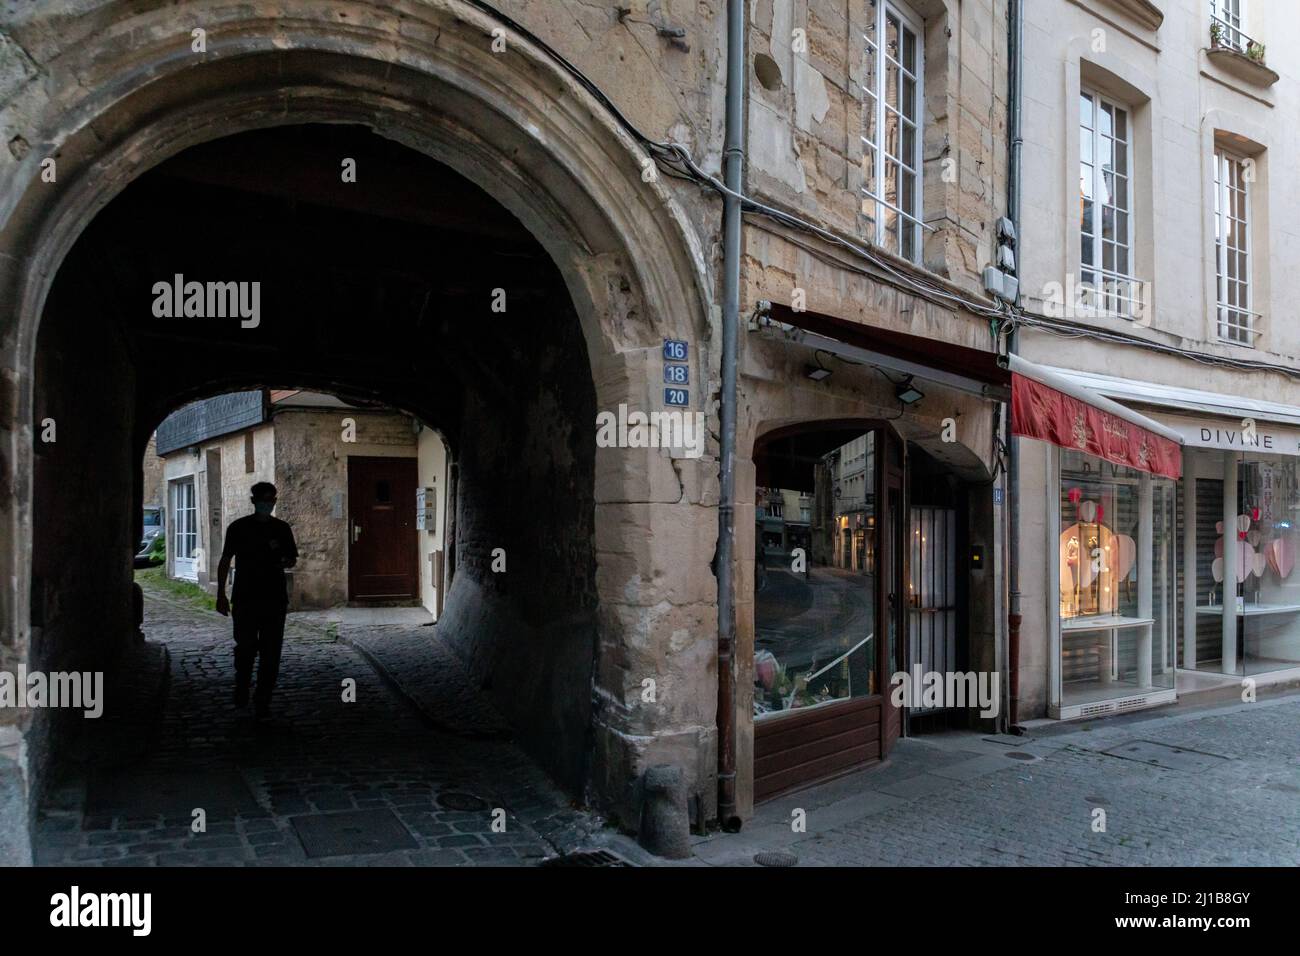 AMBIANCE ON THE RUE FROIDE, CAEN, CALVADOS, NORMANDY, FRANCE Stock Photo